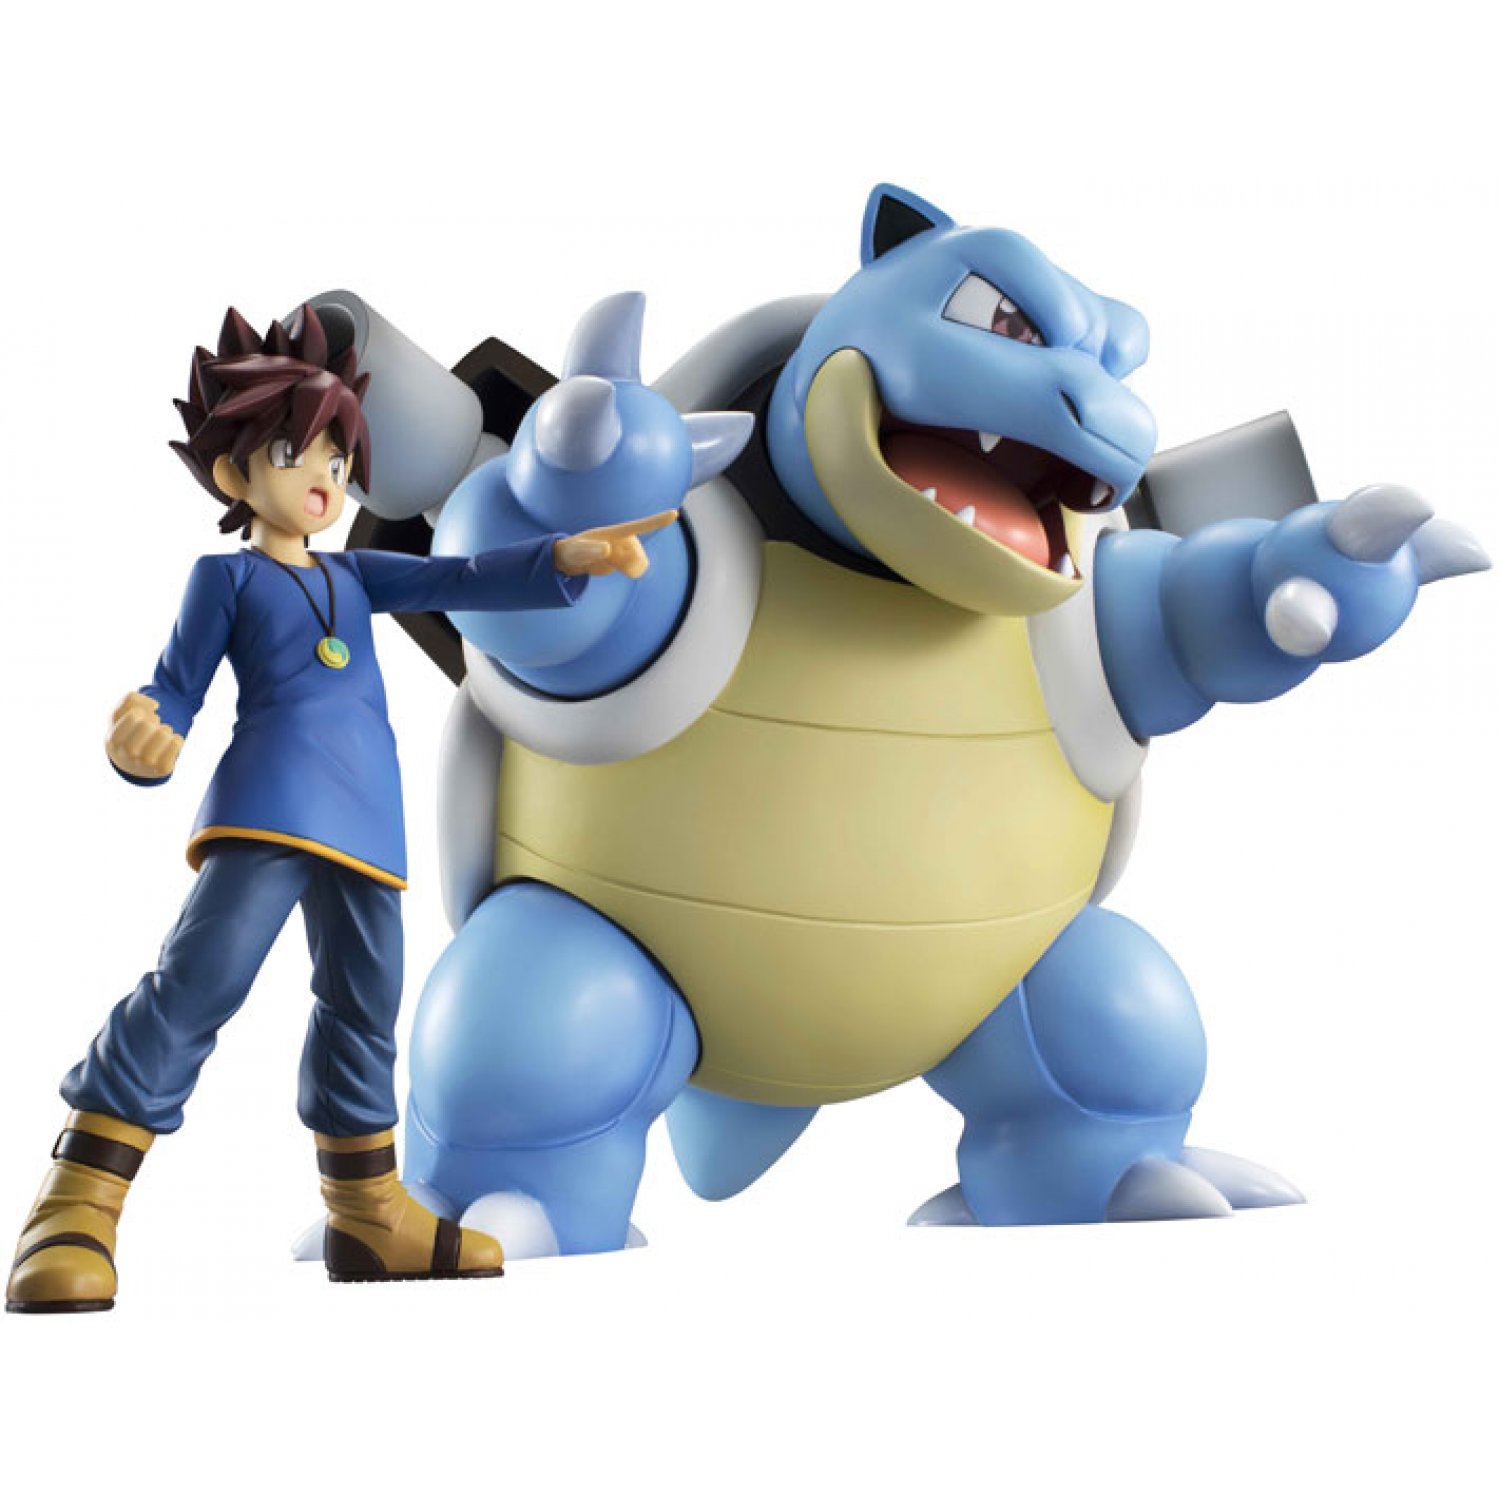 The newest G.E.M. Series Pokemon pre-painted PVC figure featuring Gary &...